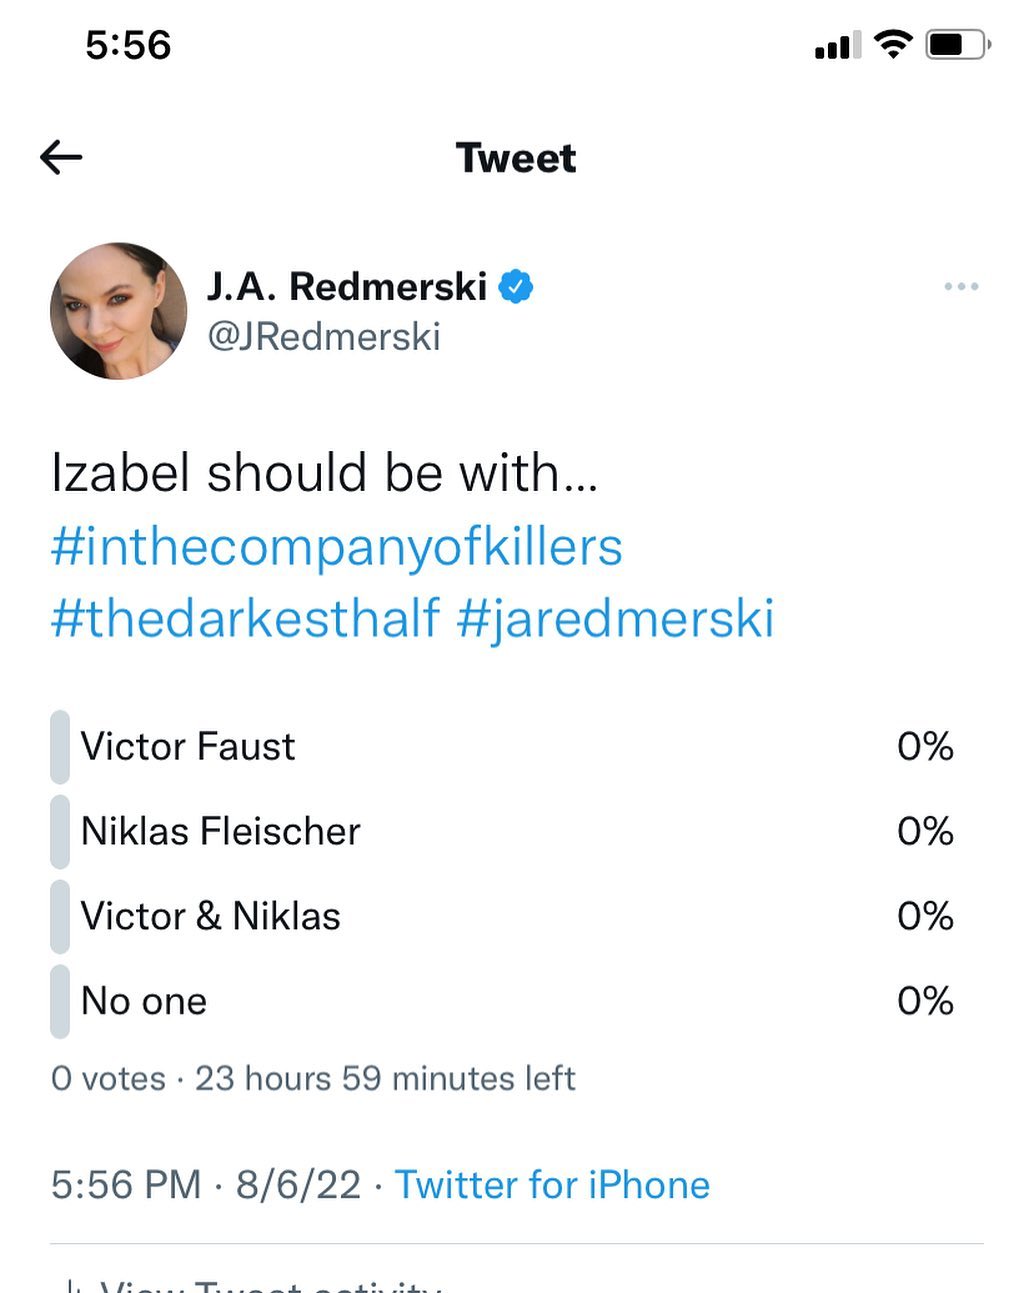 Head over to Twitter if you want to vote on this poll!🩸#thedarkesthalf #inthecompanyofkillers #jaredmerski